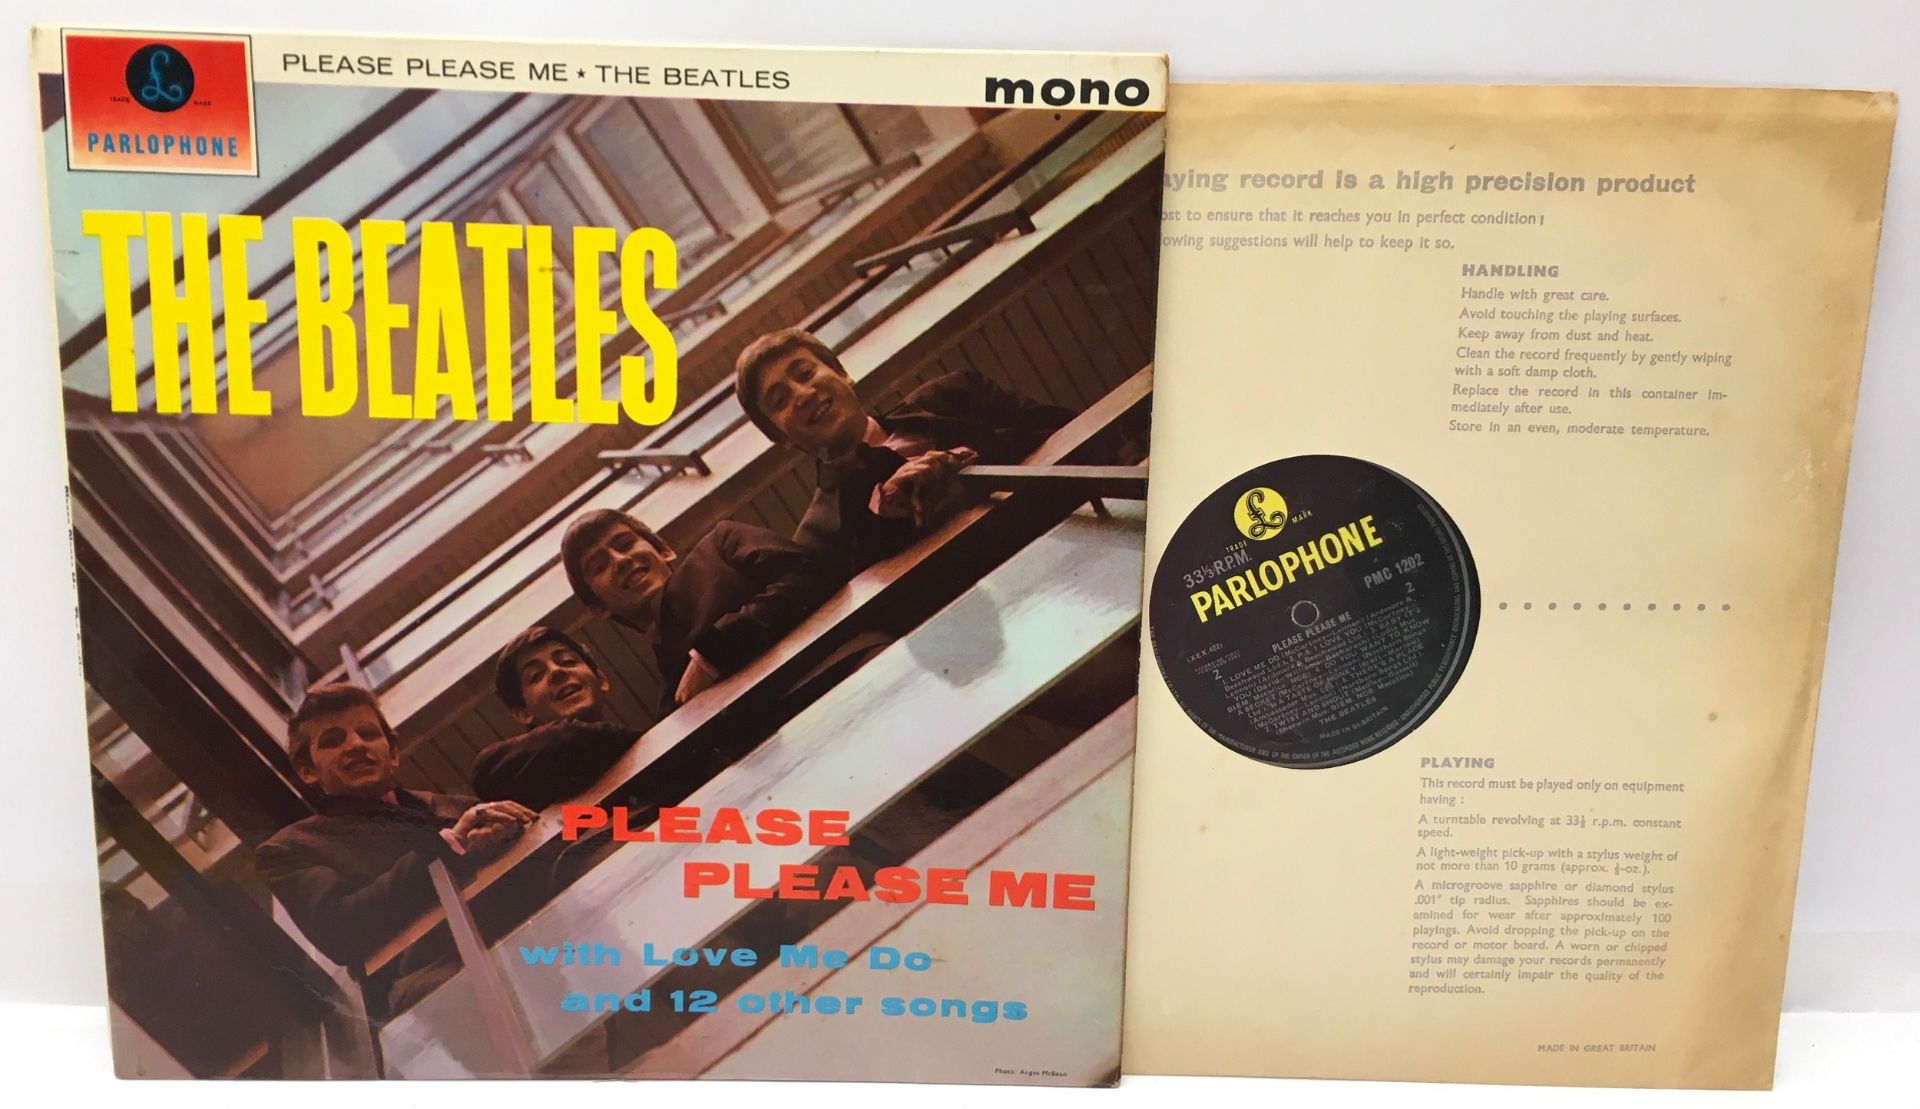 THE BEATLES 'PLEASE PLEASE ME' EARLY 3rd PRESS VINYL LP. A fantastic copy of this Mono press on